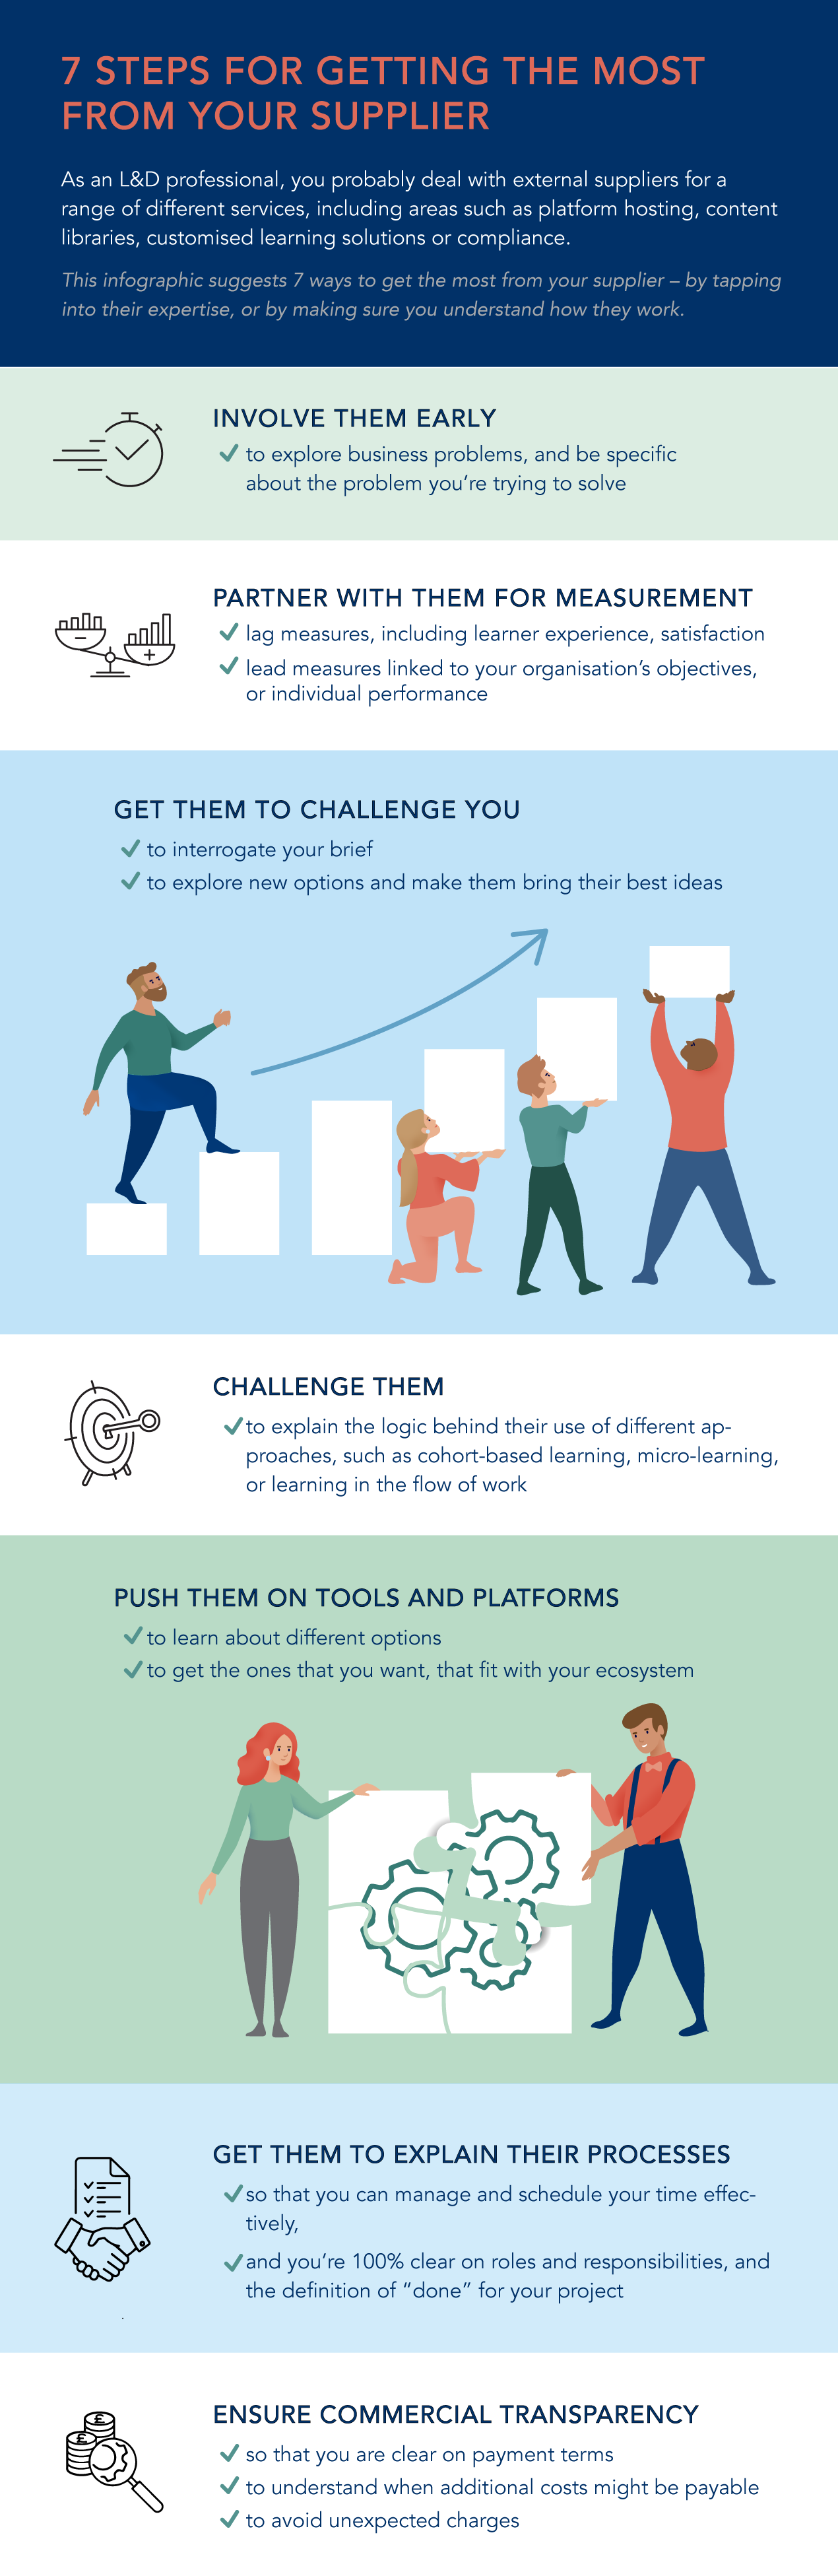 7-steps-for-getting-the-most-from-your-supplier-infographic copy